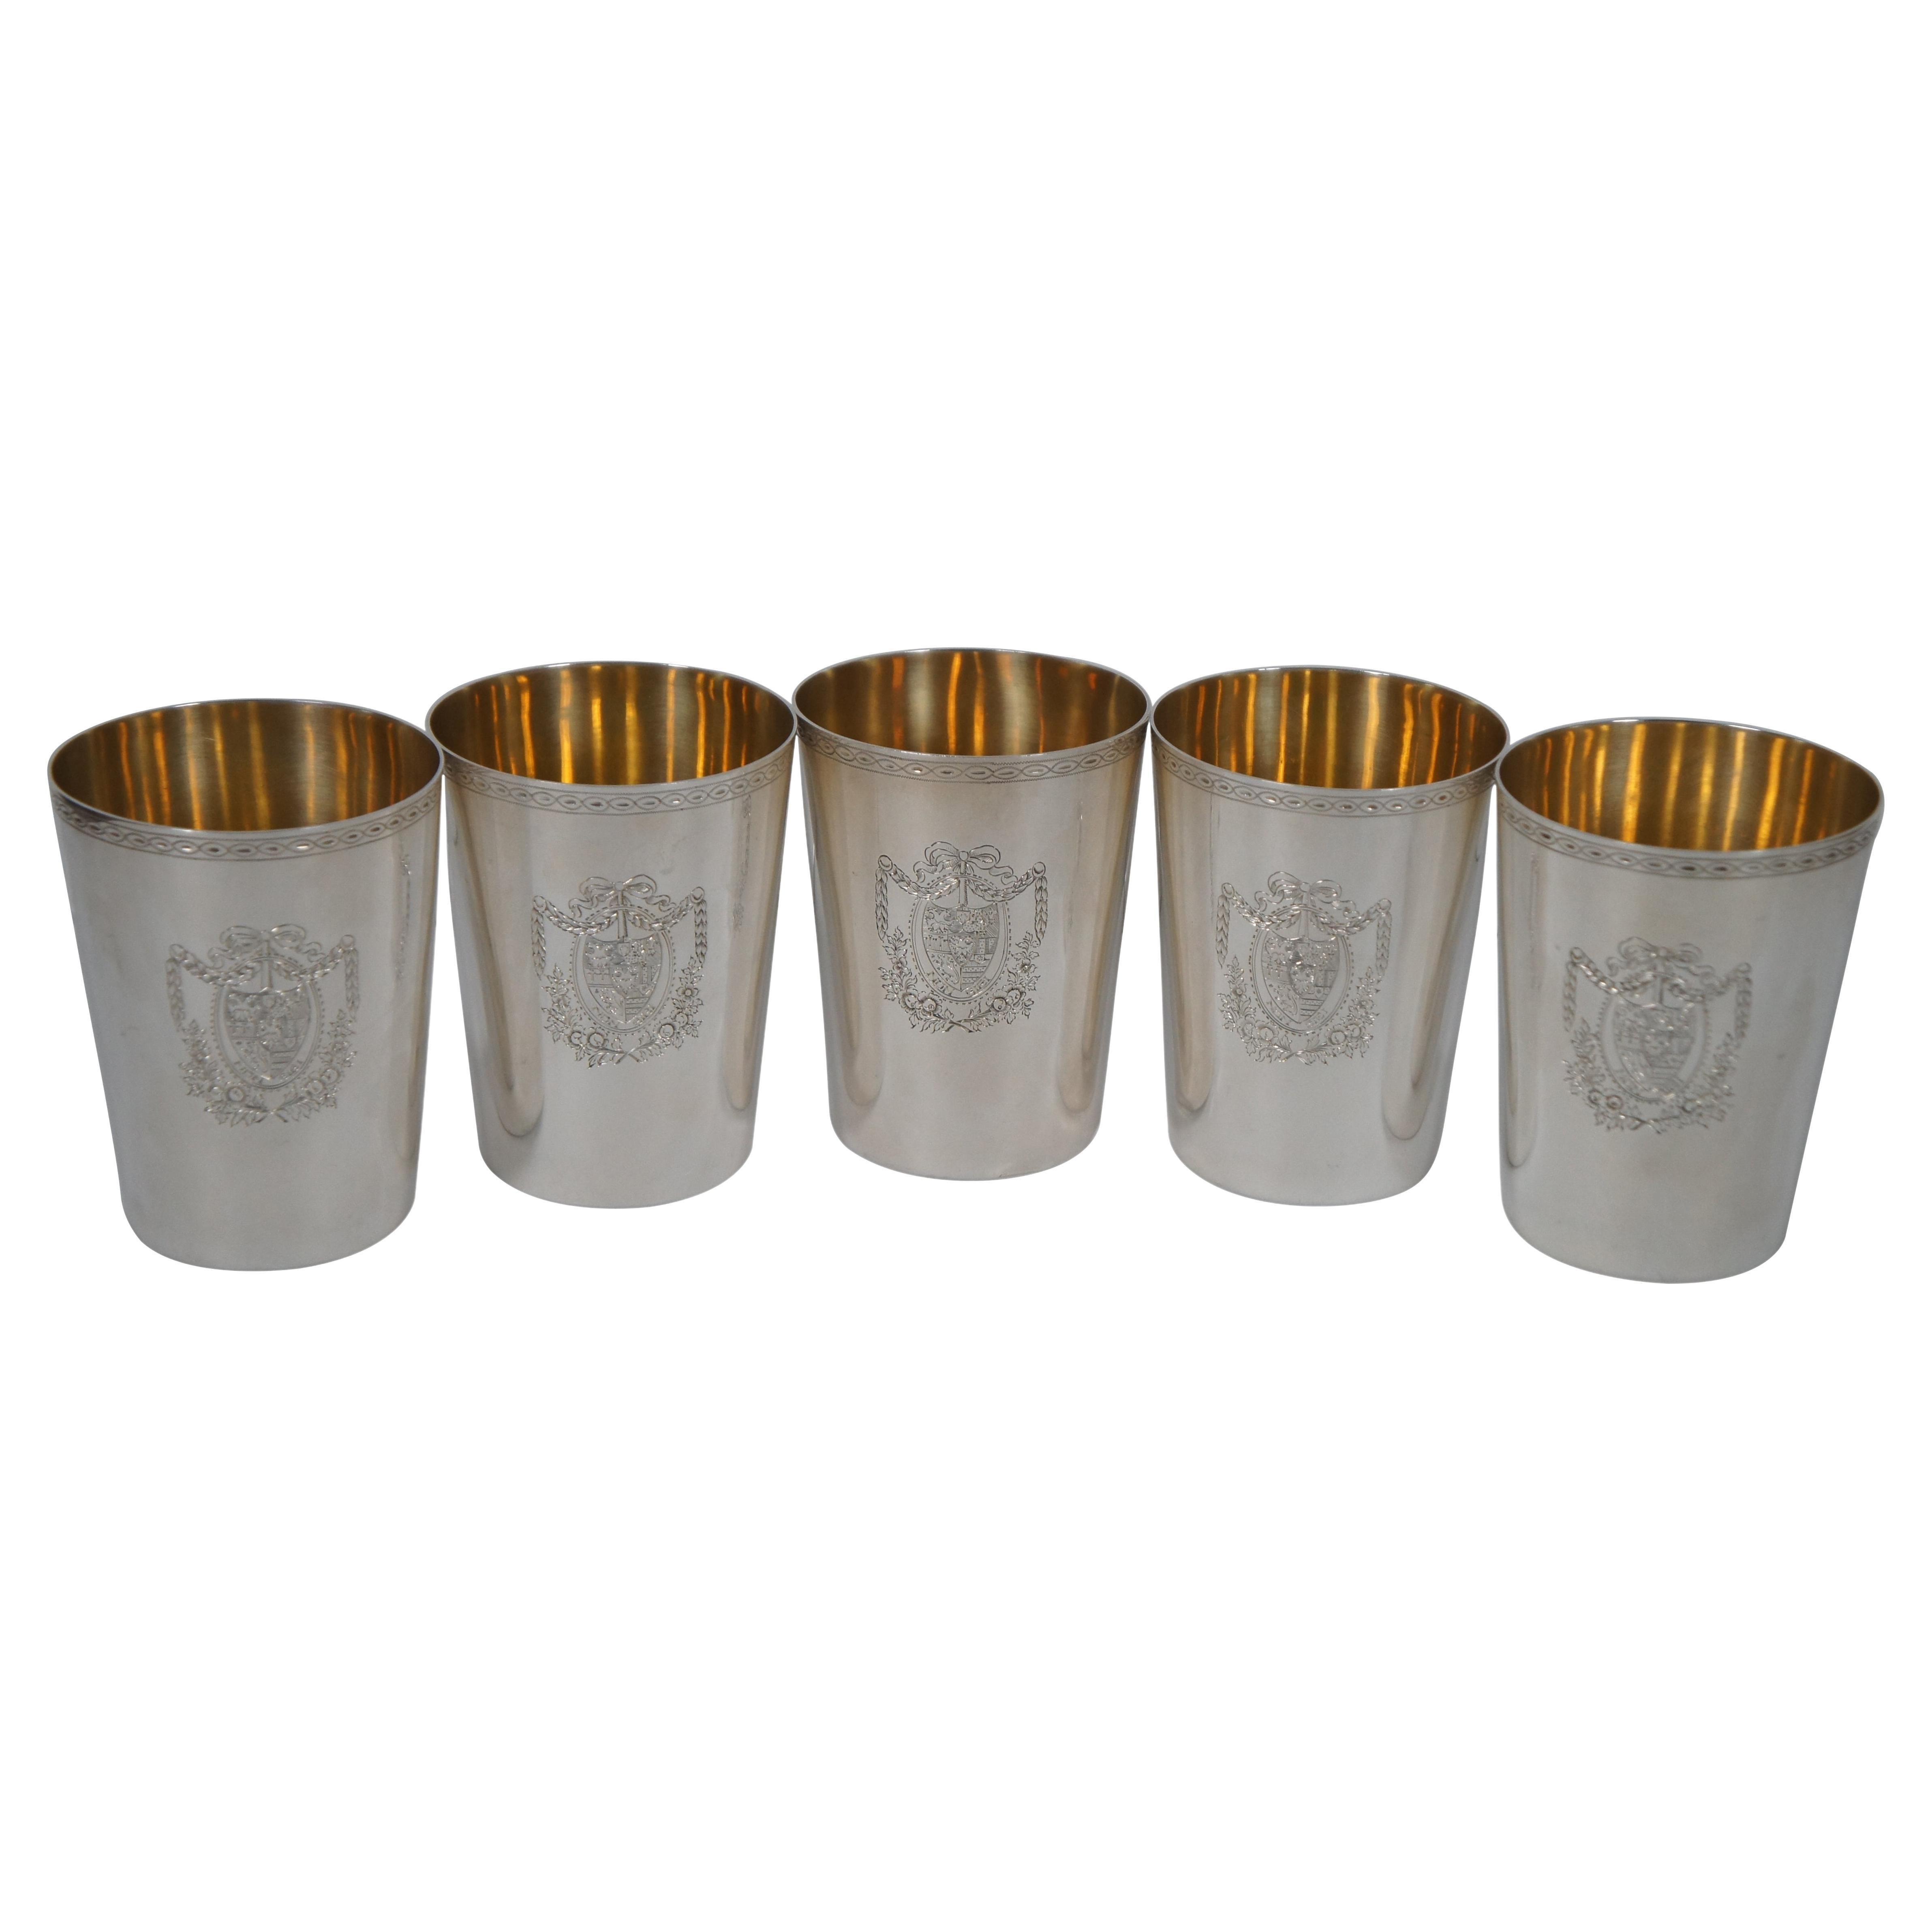 5 Antique Sterling Silver Neoclassical Coat of Arm Crest Mint Julep Cups 816g 4"